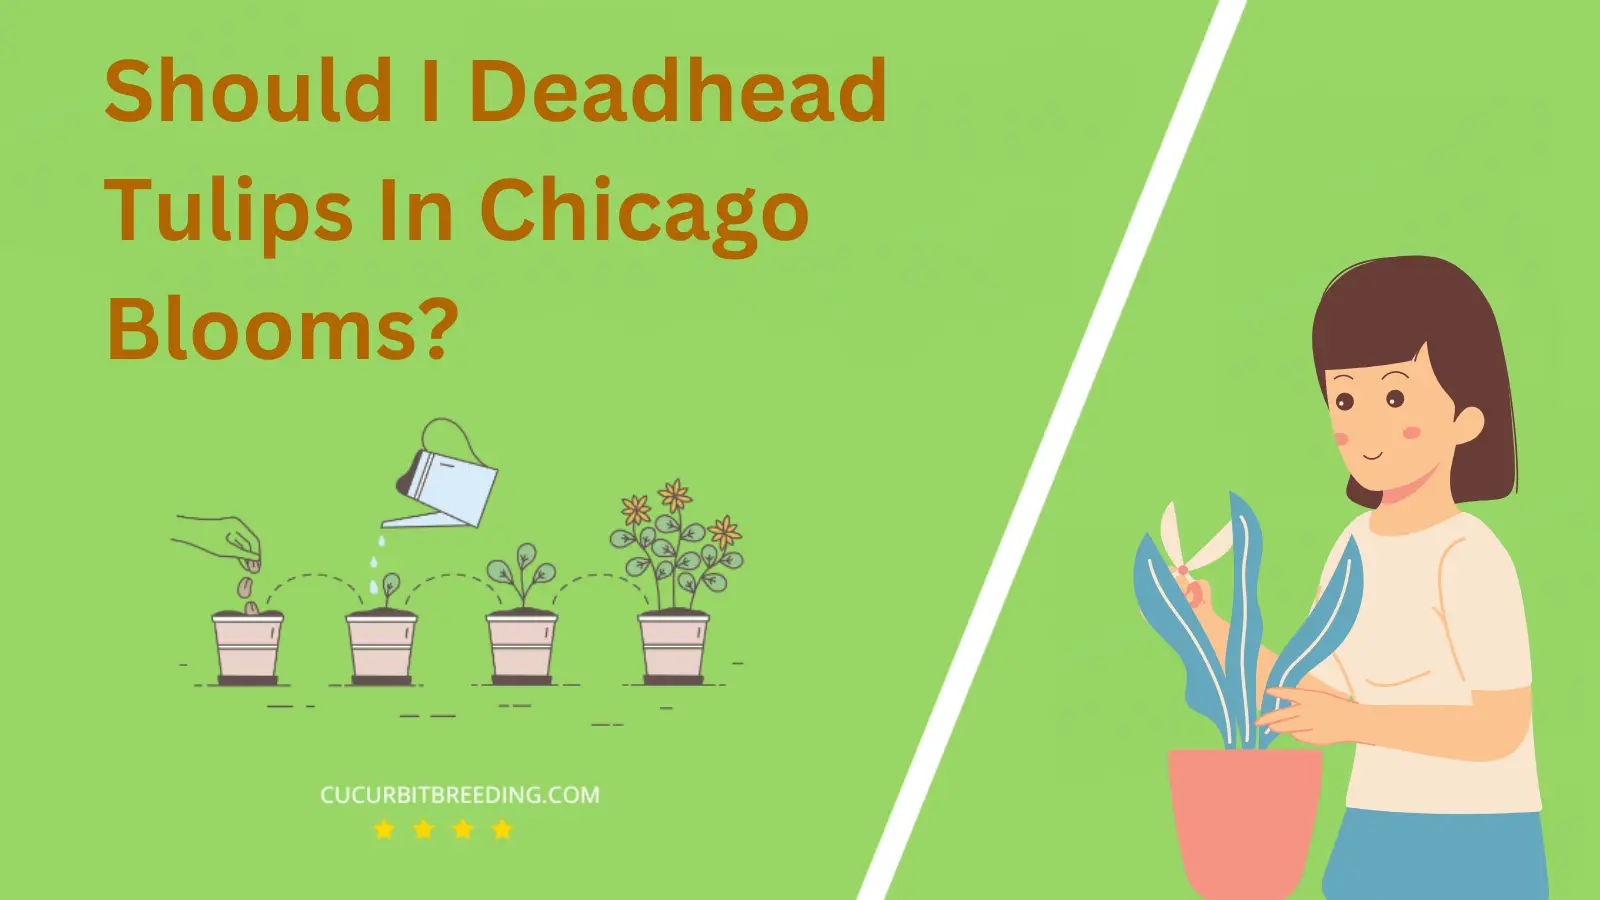 Should I Deadhead Tulips In Chicago Blooms?